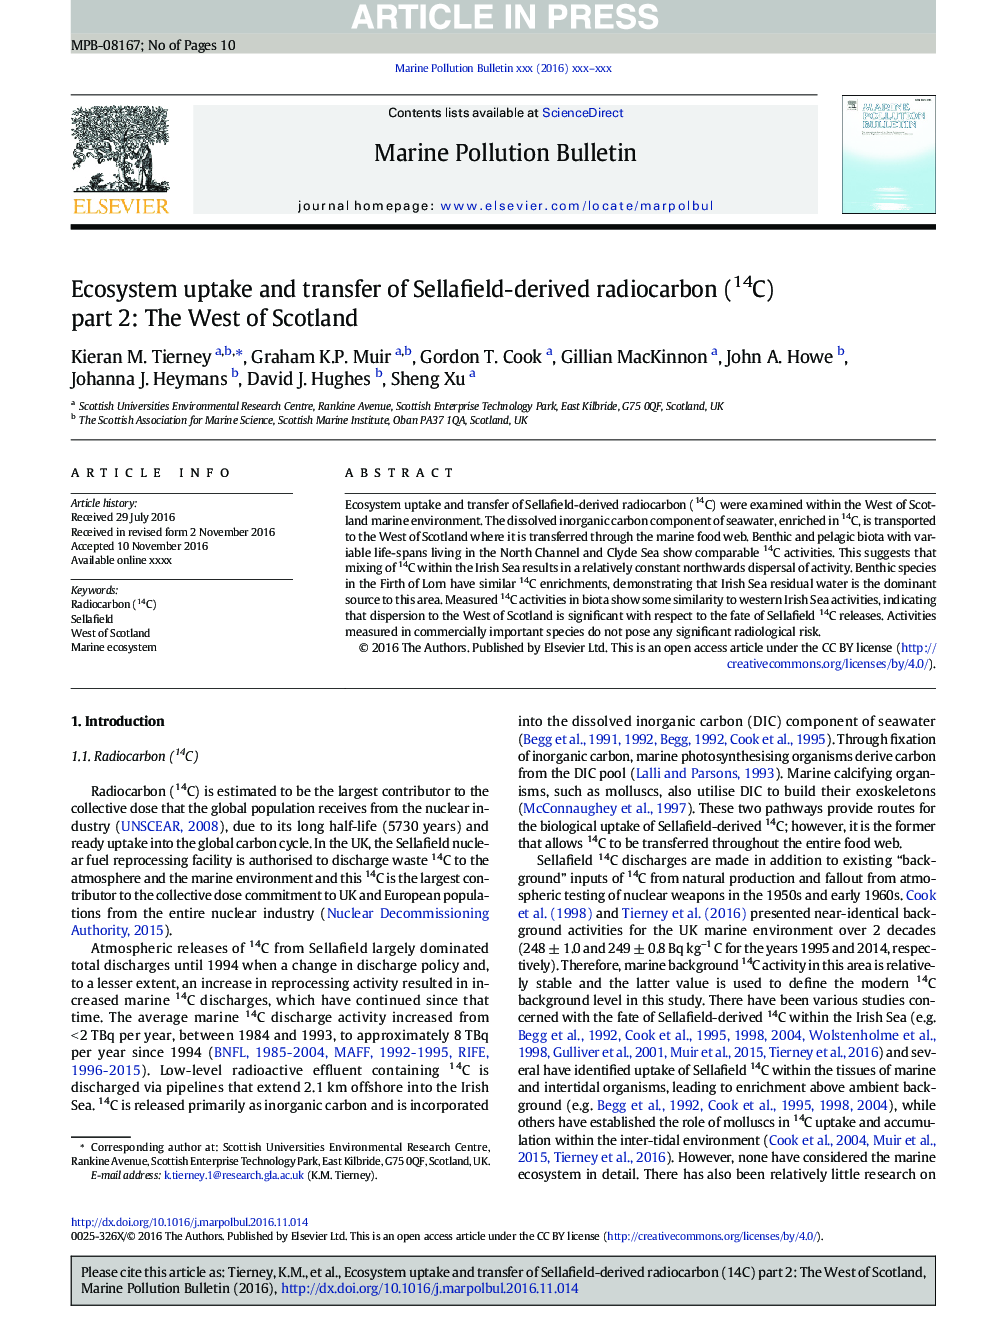 Ecosystem uptake and transfer of Sellafield-derived radiocarbon (14C) part 2: The West of Scotland